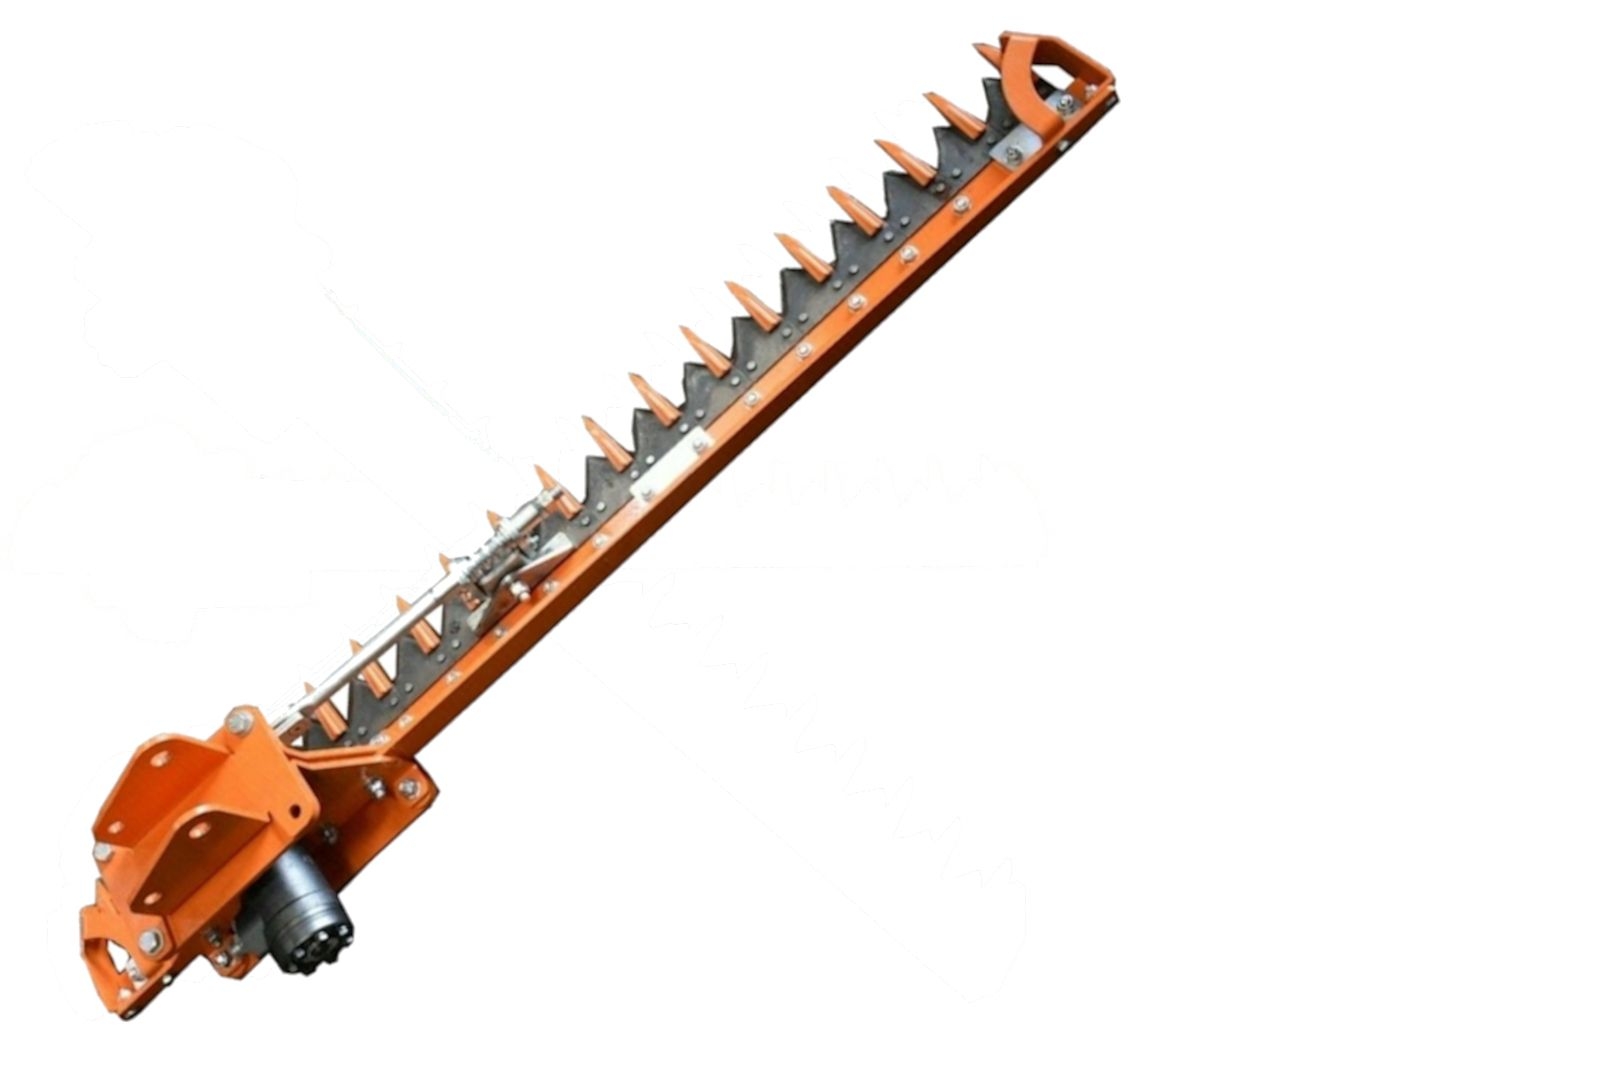 MDL Mini Digger – Excavator Hedge Cutter Attachment – Manufactured in Britain. – Custom made Bracket – Hedge Cutting – 3 Year Warranty – MDL Power Up